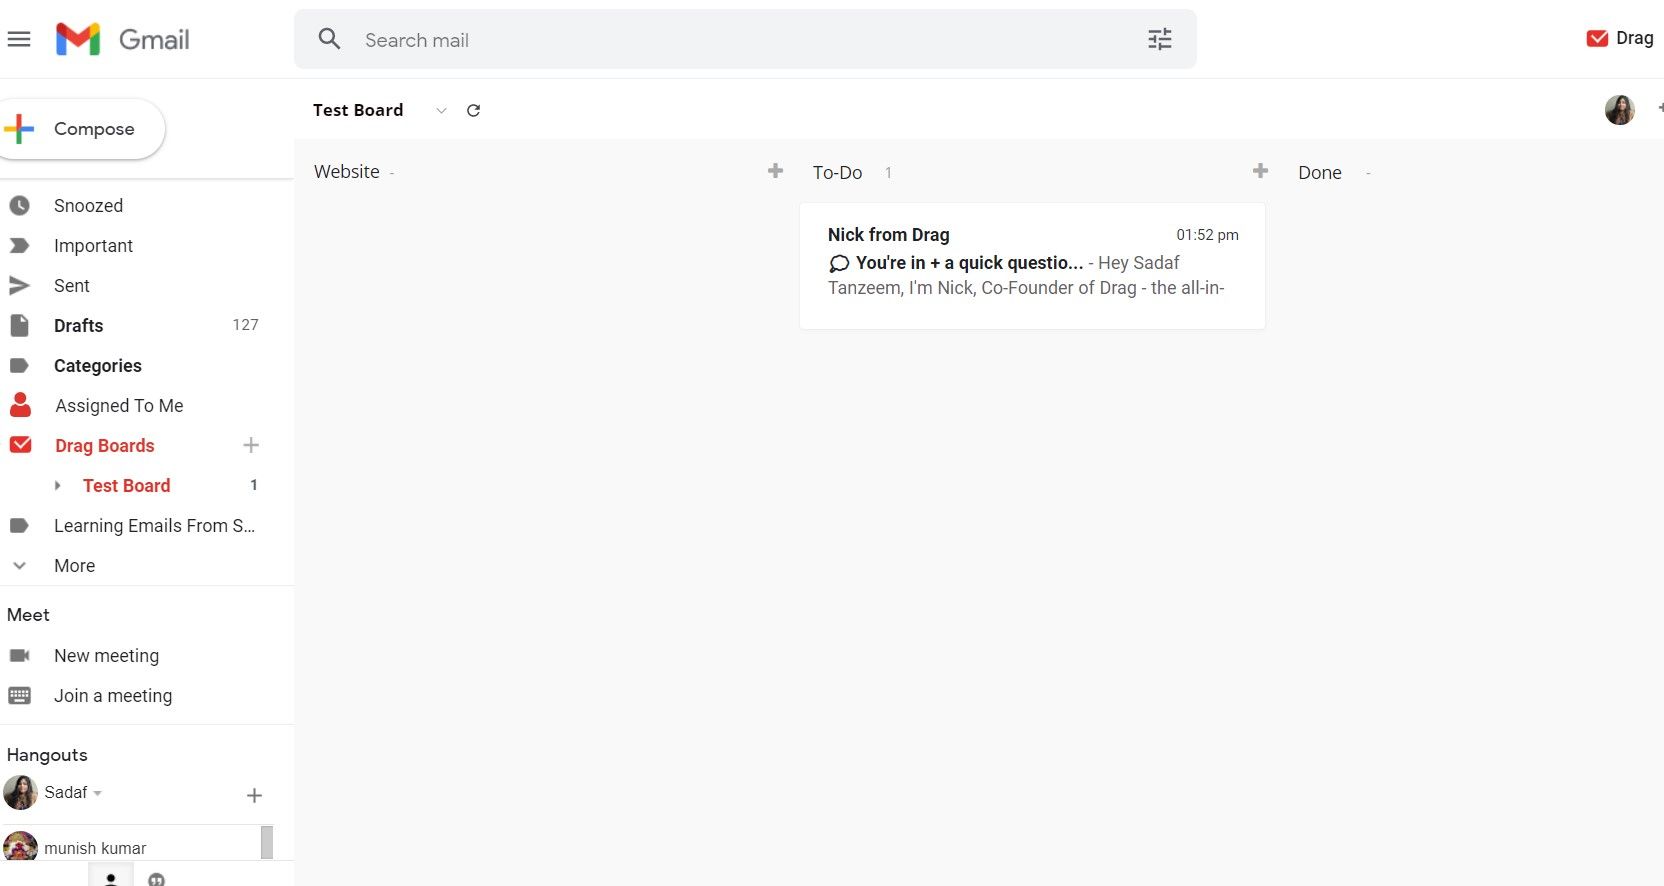 The different labels inside the inbox using Drag Chrome extension